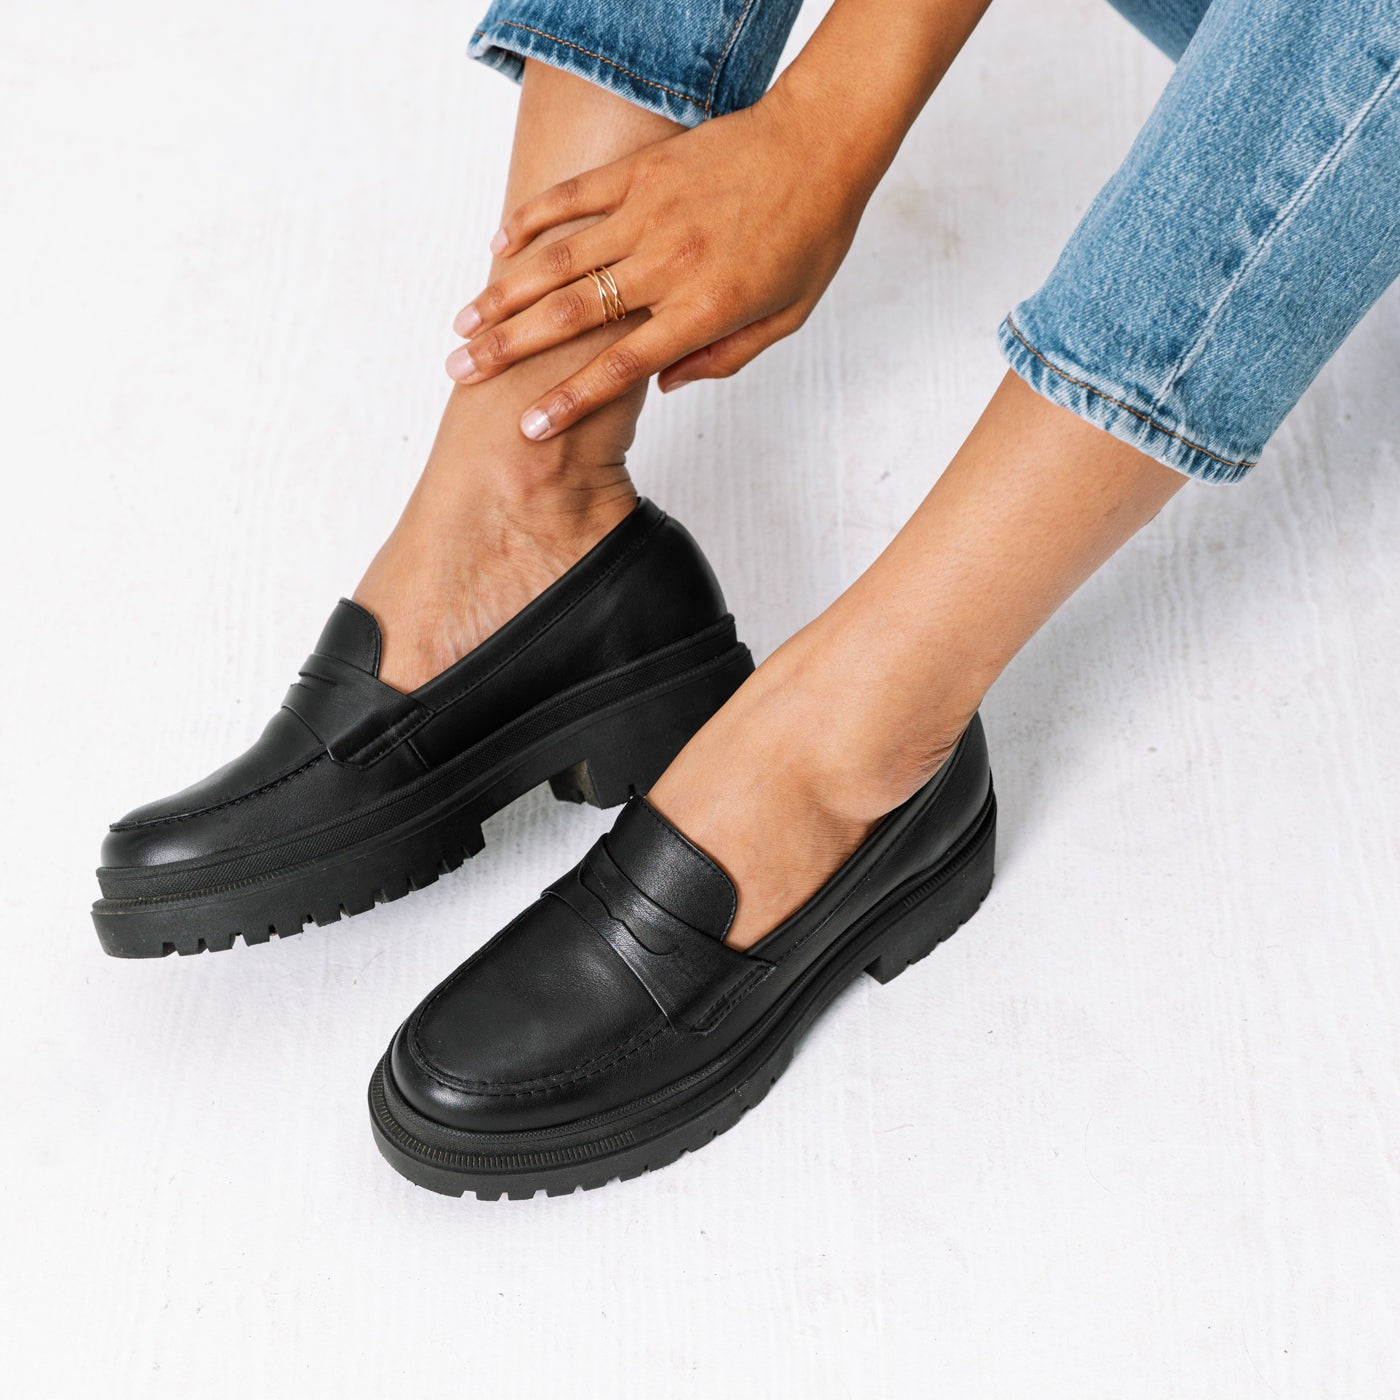 Penny Loafer - Solid Black Leather (Chunky Sole)